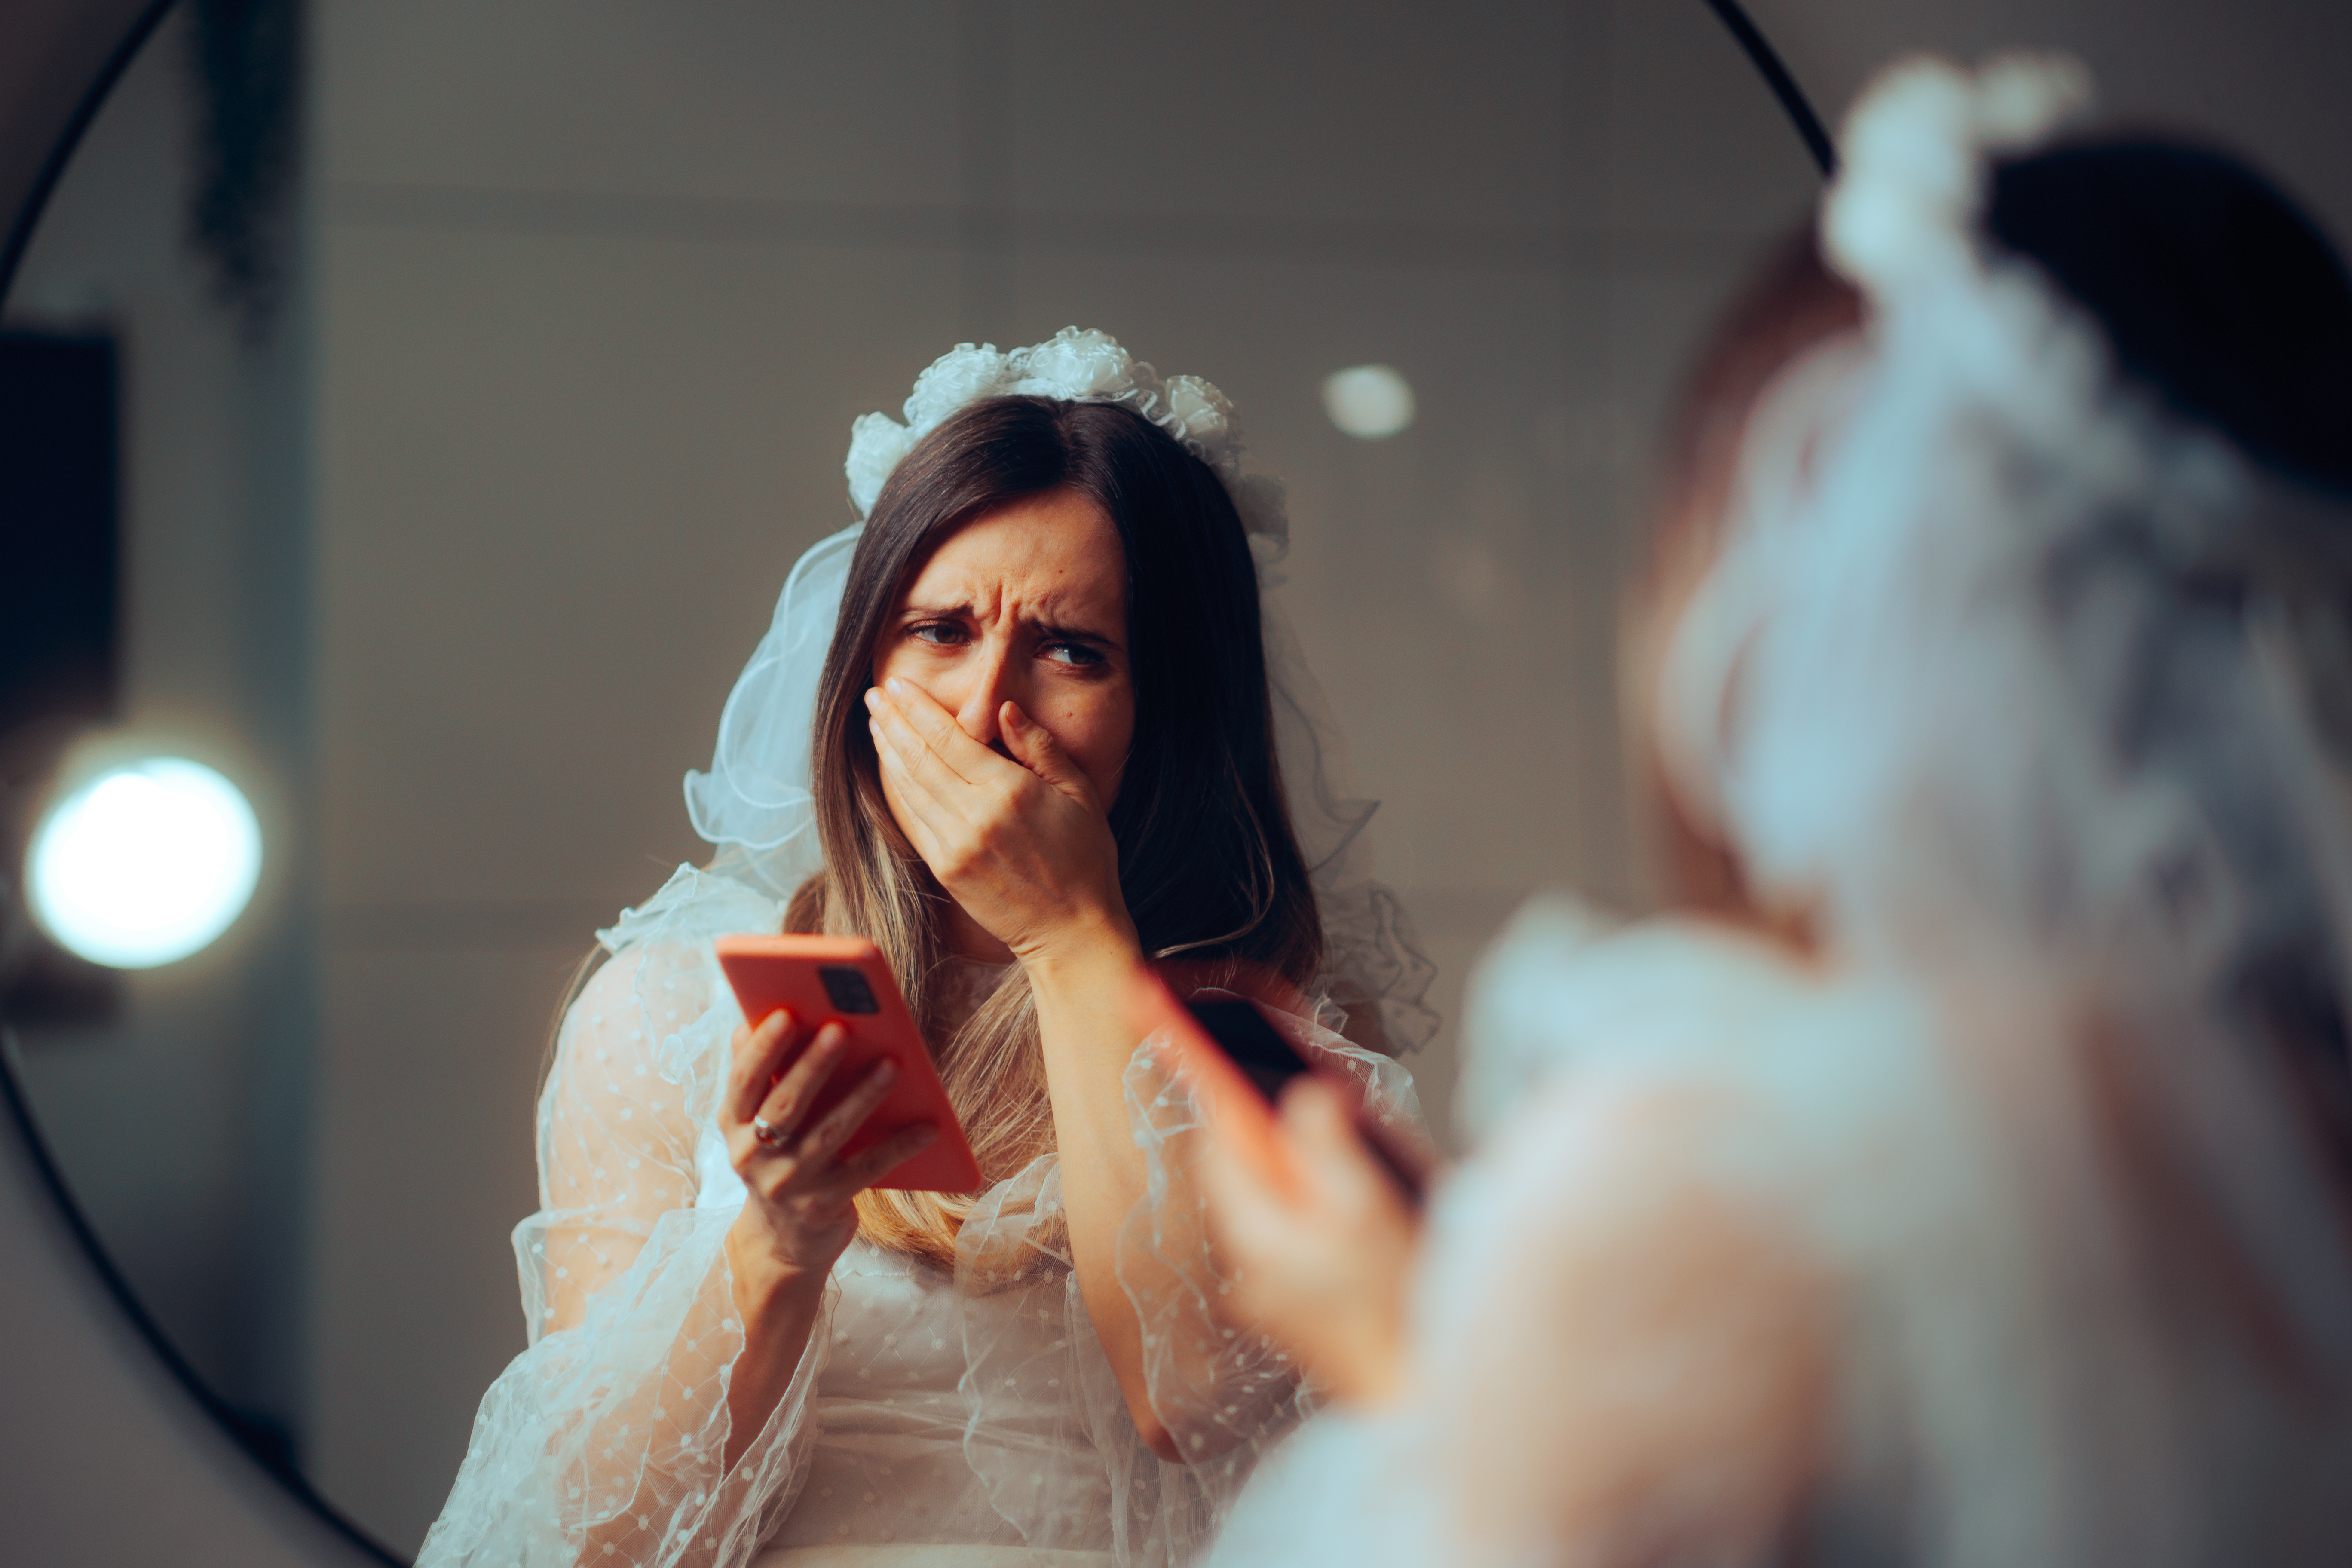 Stressed bride finding out her fiance is cheating on her | Source: Getty Images